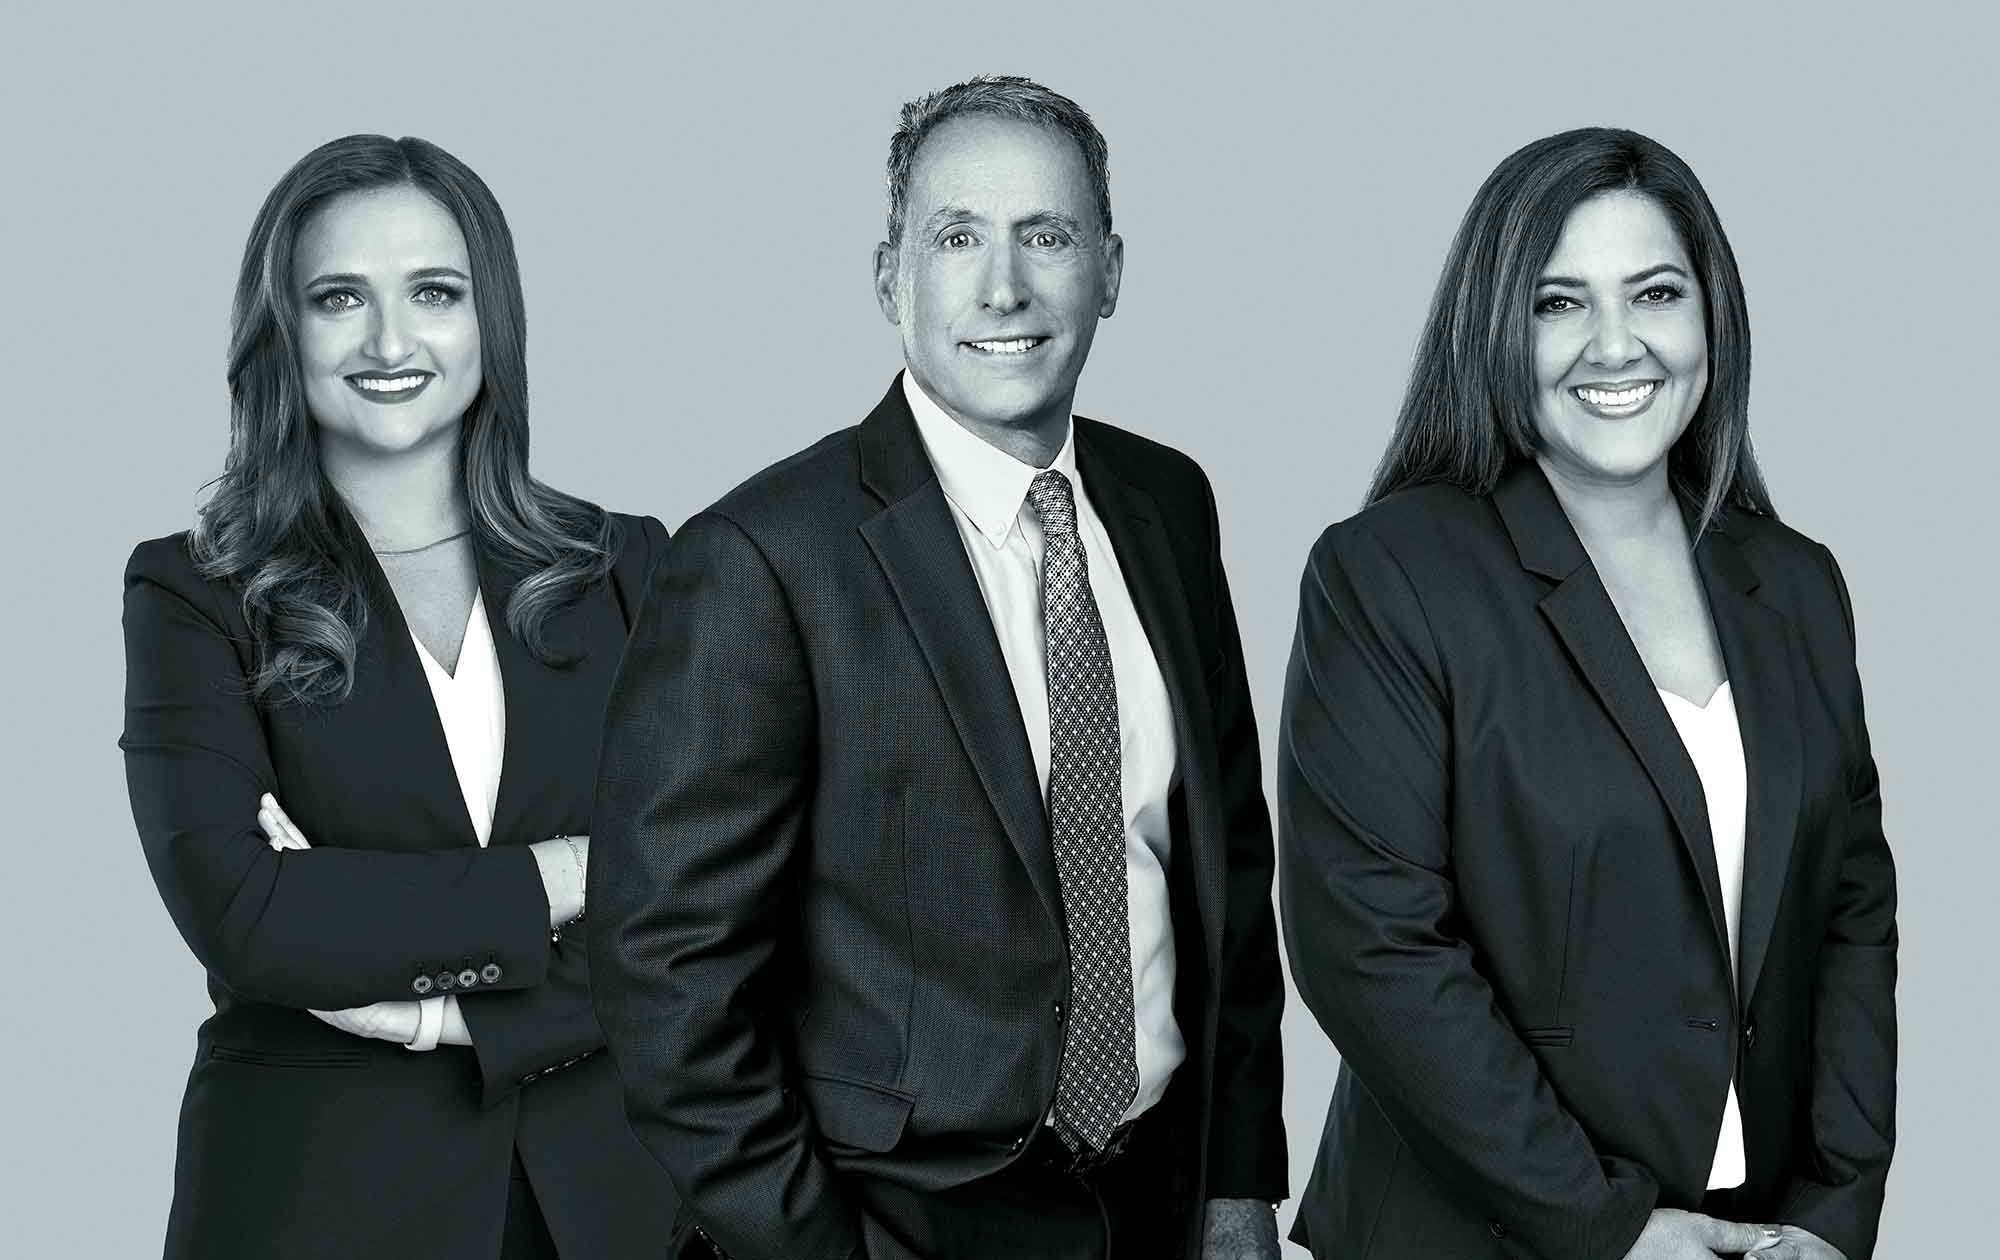 California professional license defense attorneys Robert K. Weinberg, Suzanne Crouts, and Melissa DuChene provide professional license defense and criminal defense for licensed professionals and businesses.